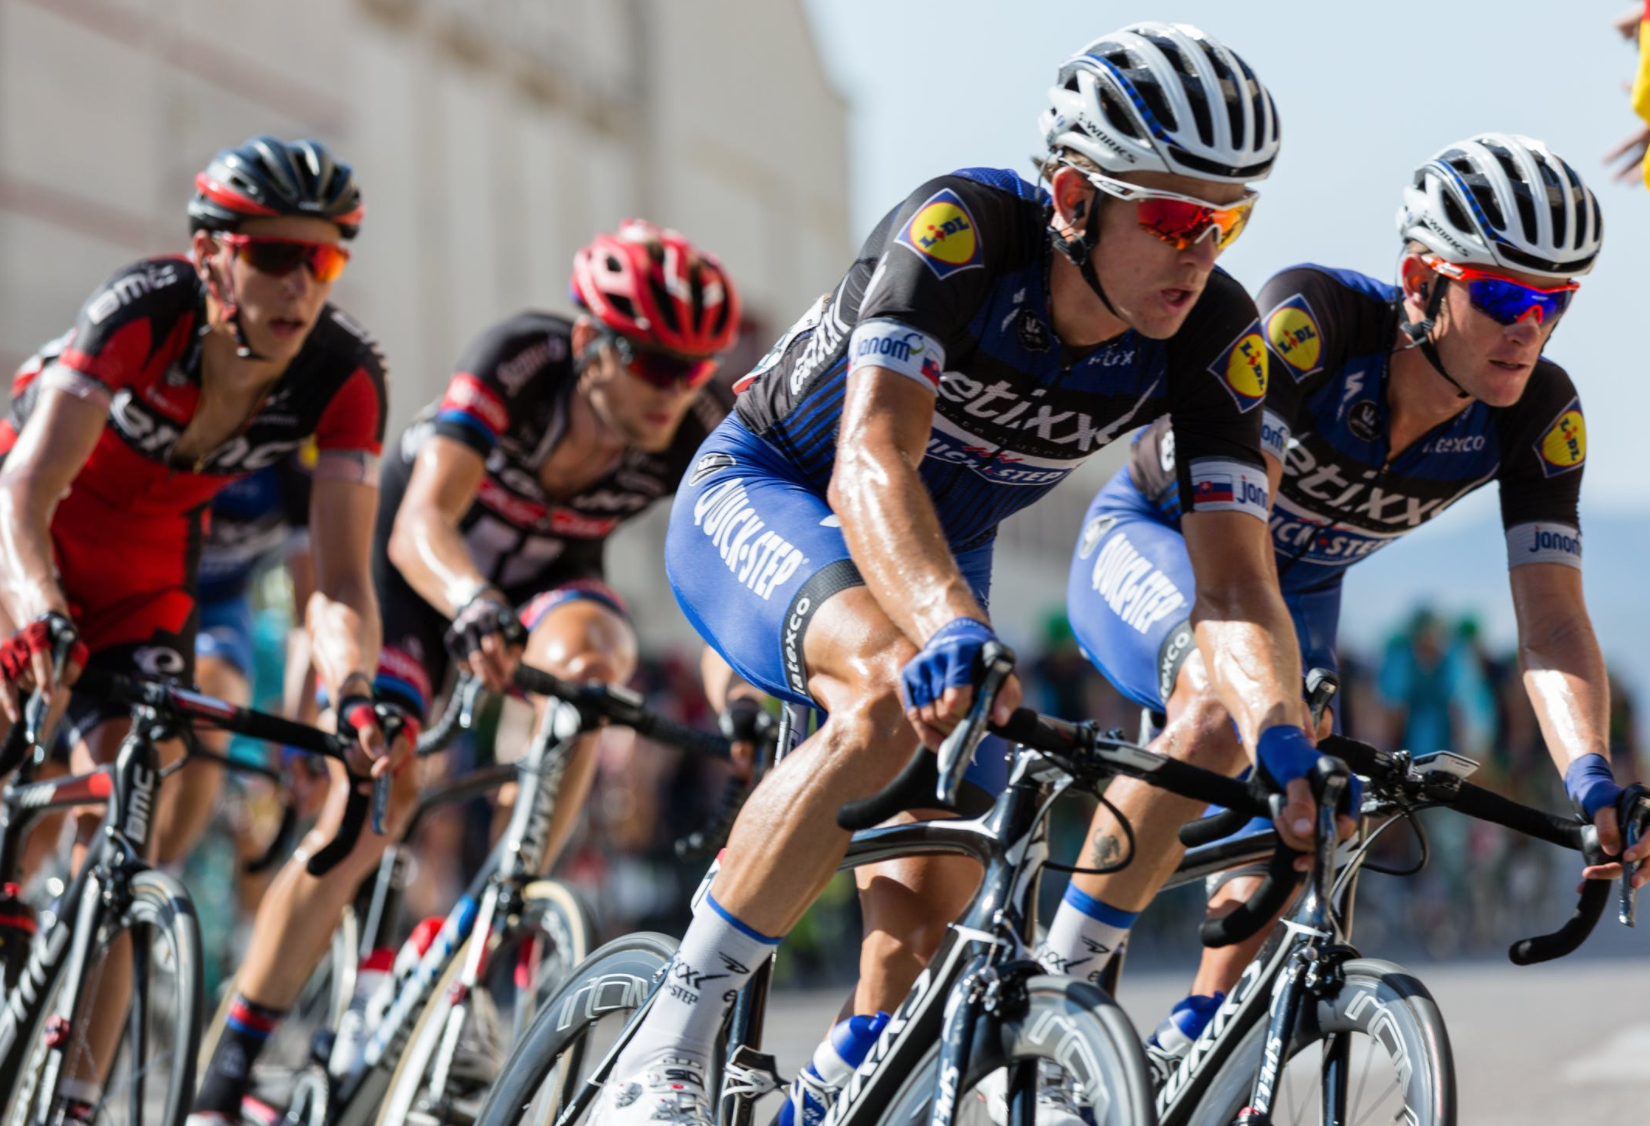 Cyclists fueled with hydrolyzed collagen peptides are pedaling through a sun-drenched road on a competitive cycling race day